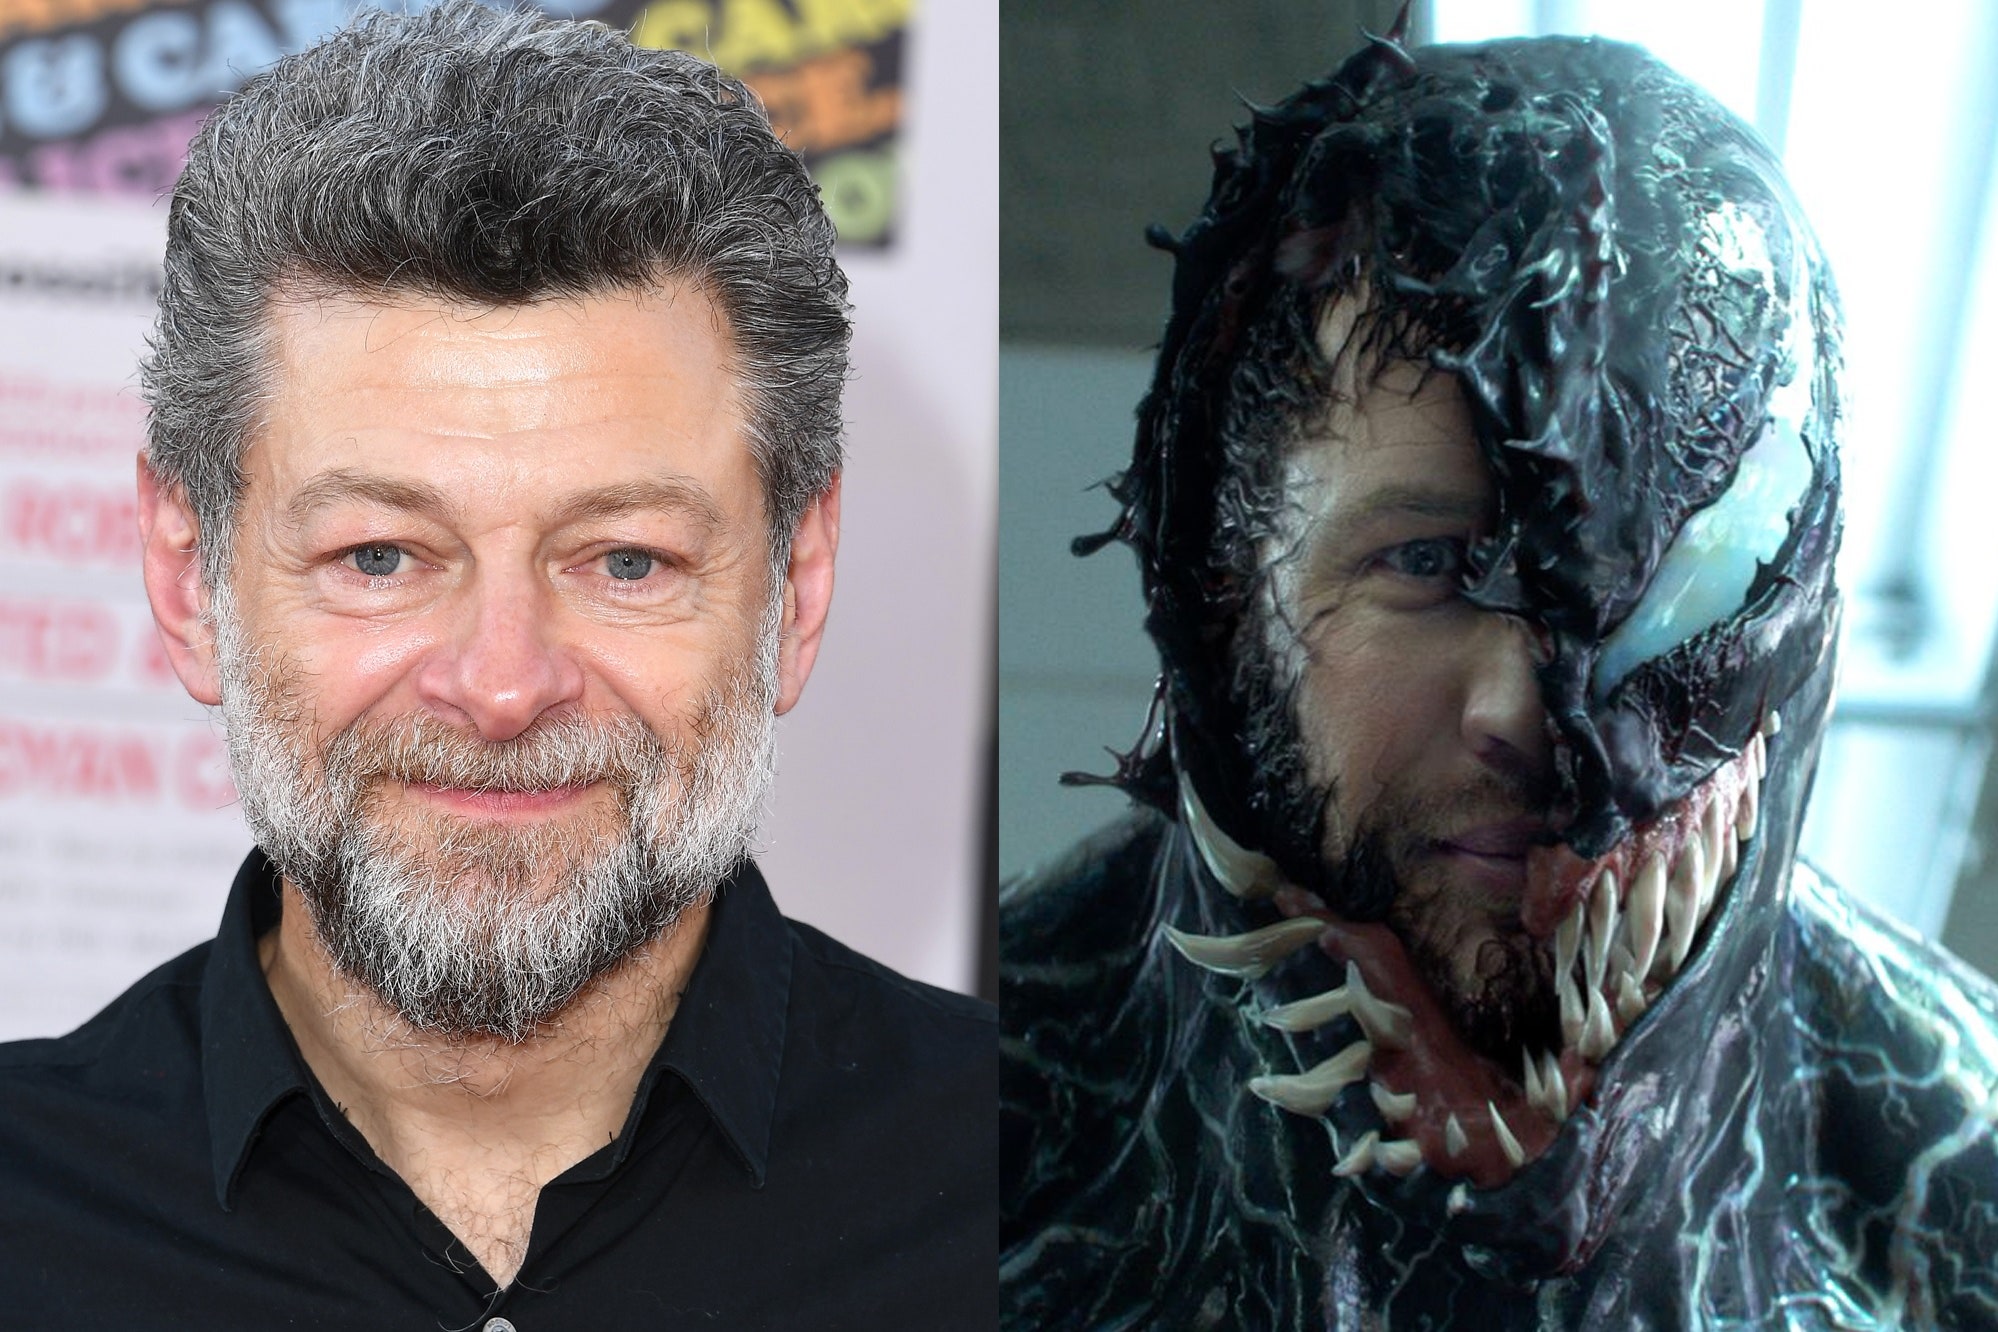 Andy Serkis Wiki, Bio, Age, Net Worth, and Other Facts